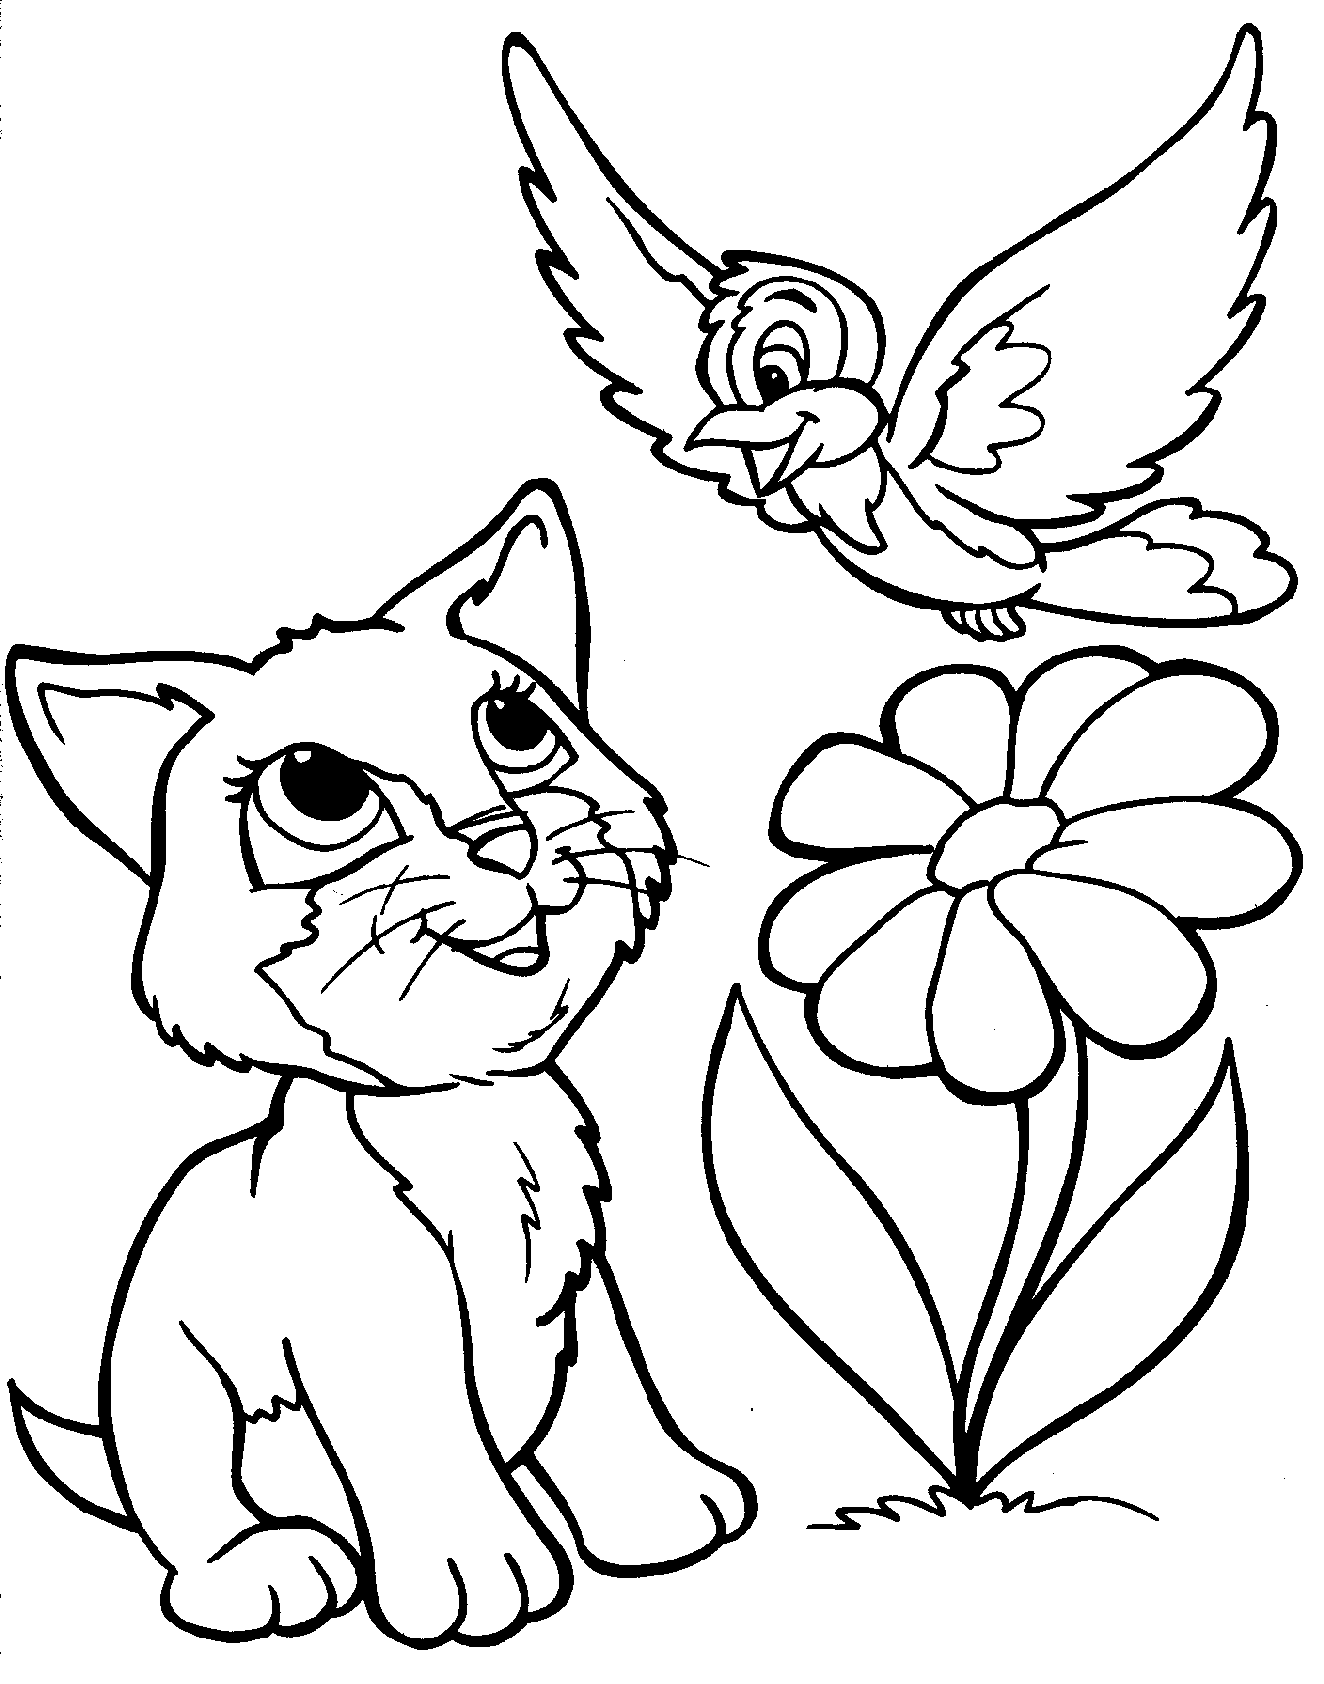 printable coloring pages hello kitty - High Quality Coloring Pages